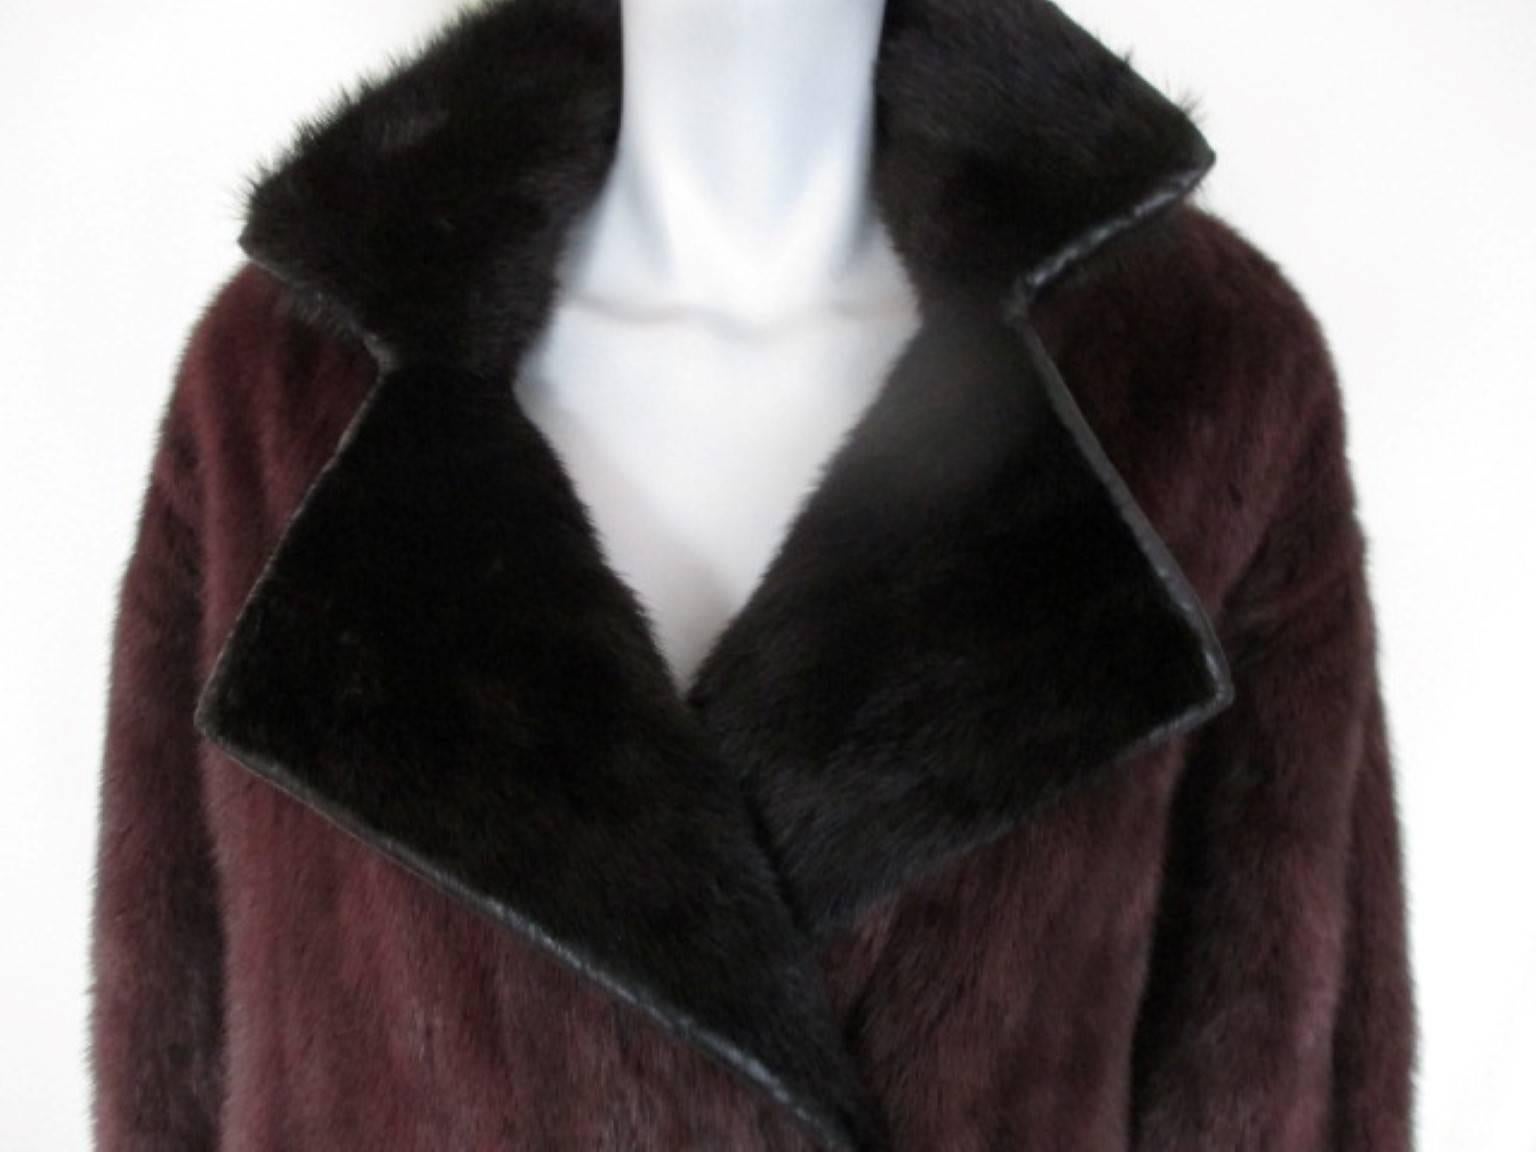 This vintage coat is made of dyed purple/black mink fur made by a furrier in Karlsruhe, Germany

We offer more exclusive vintage fur coats, view our frontstore
Details:
The sleeves and collar are trimmed with leather.
It has 2 pockets, 1 inside